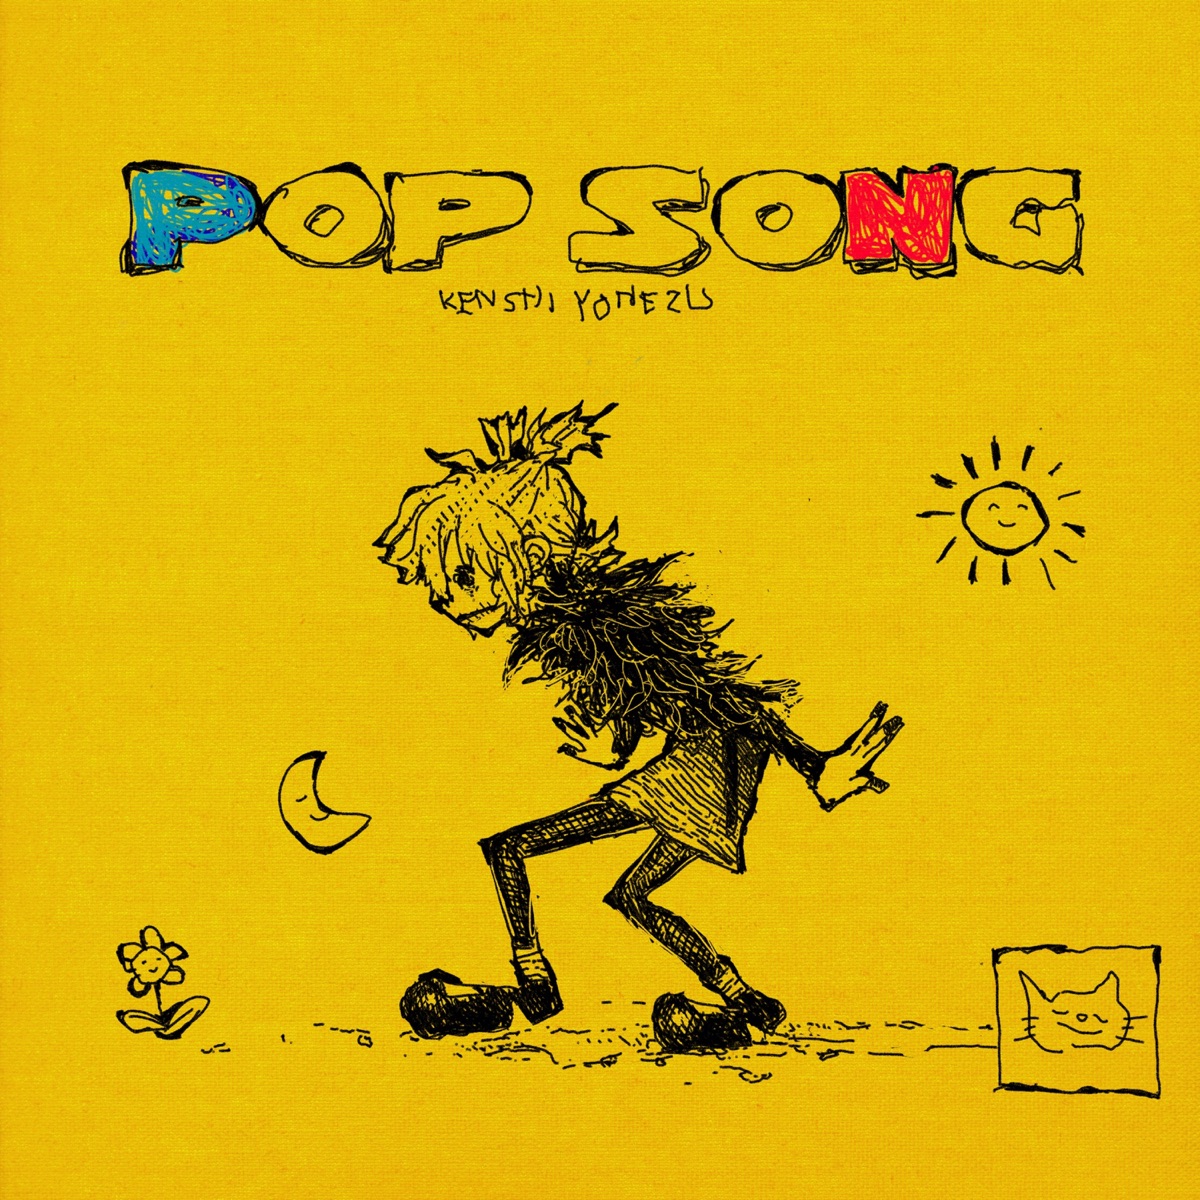 Cover art for『Kenshi Yonezu - POP SONG』from the release『POP SONG』